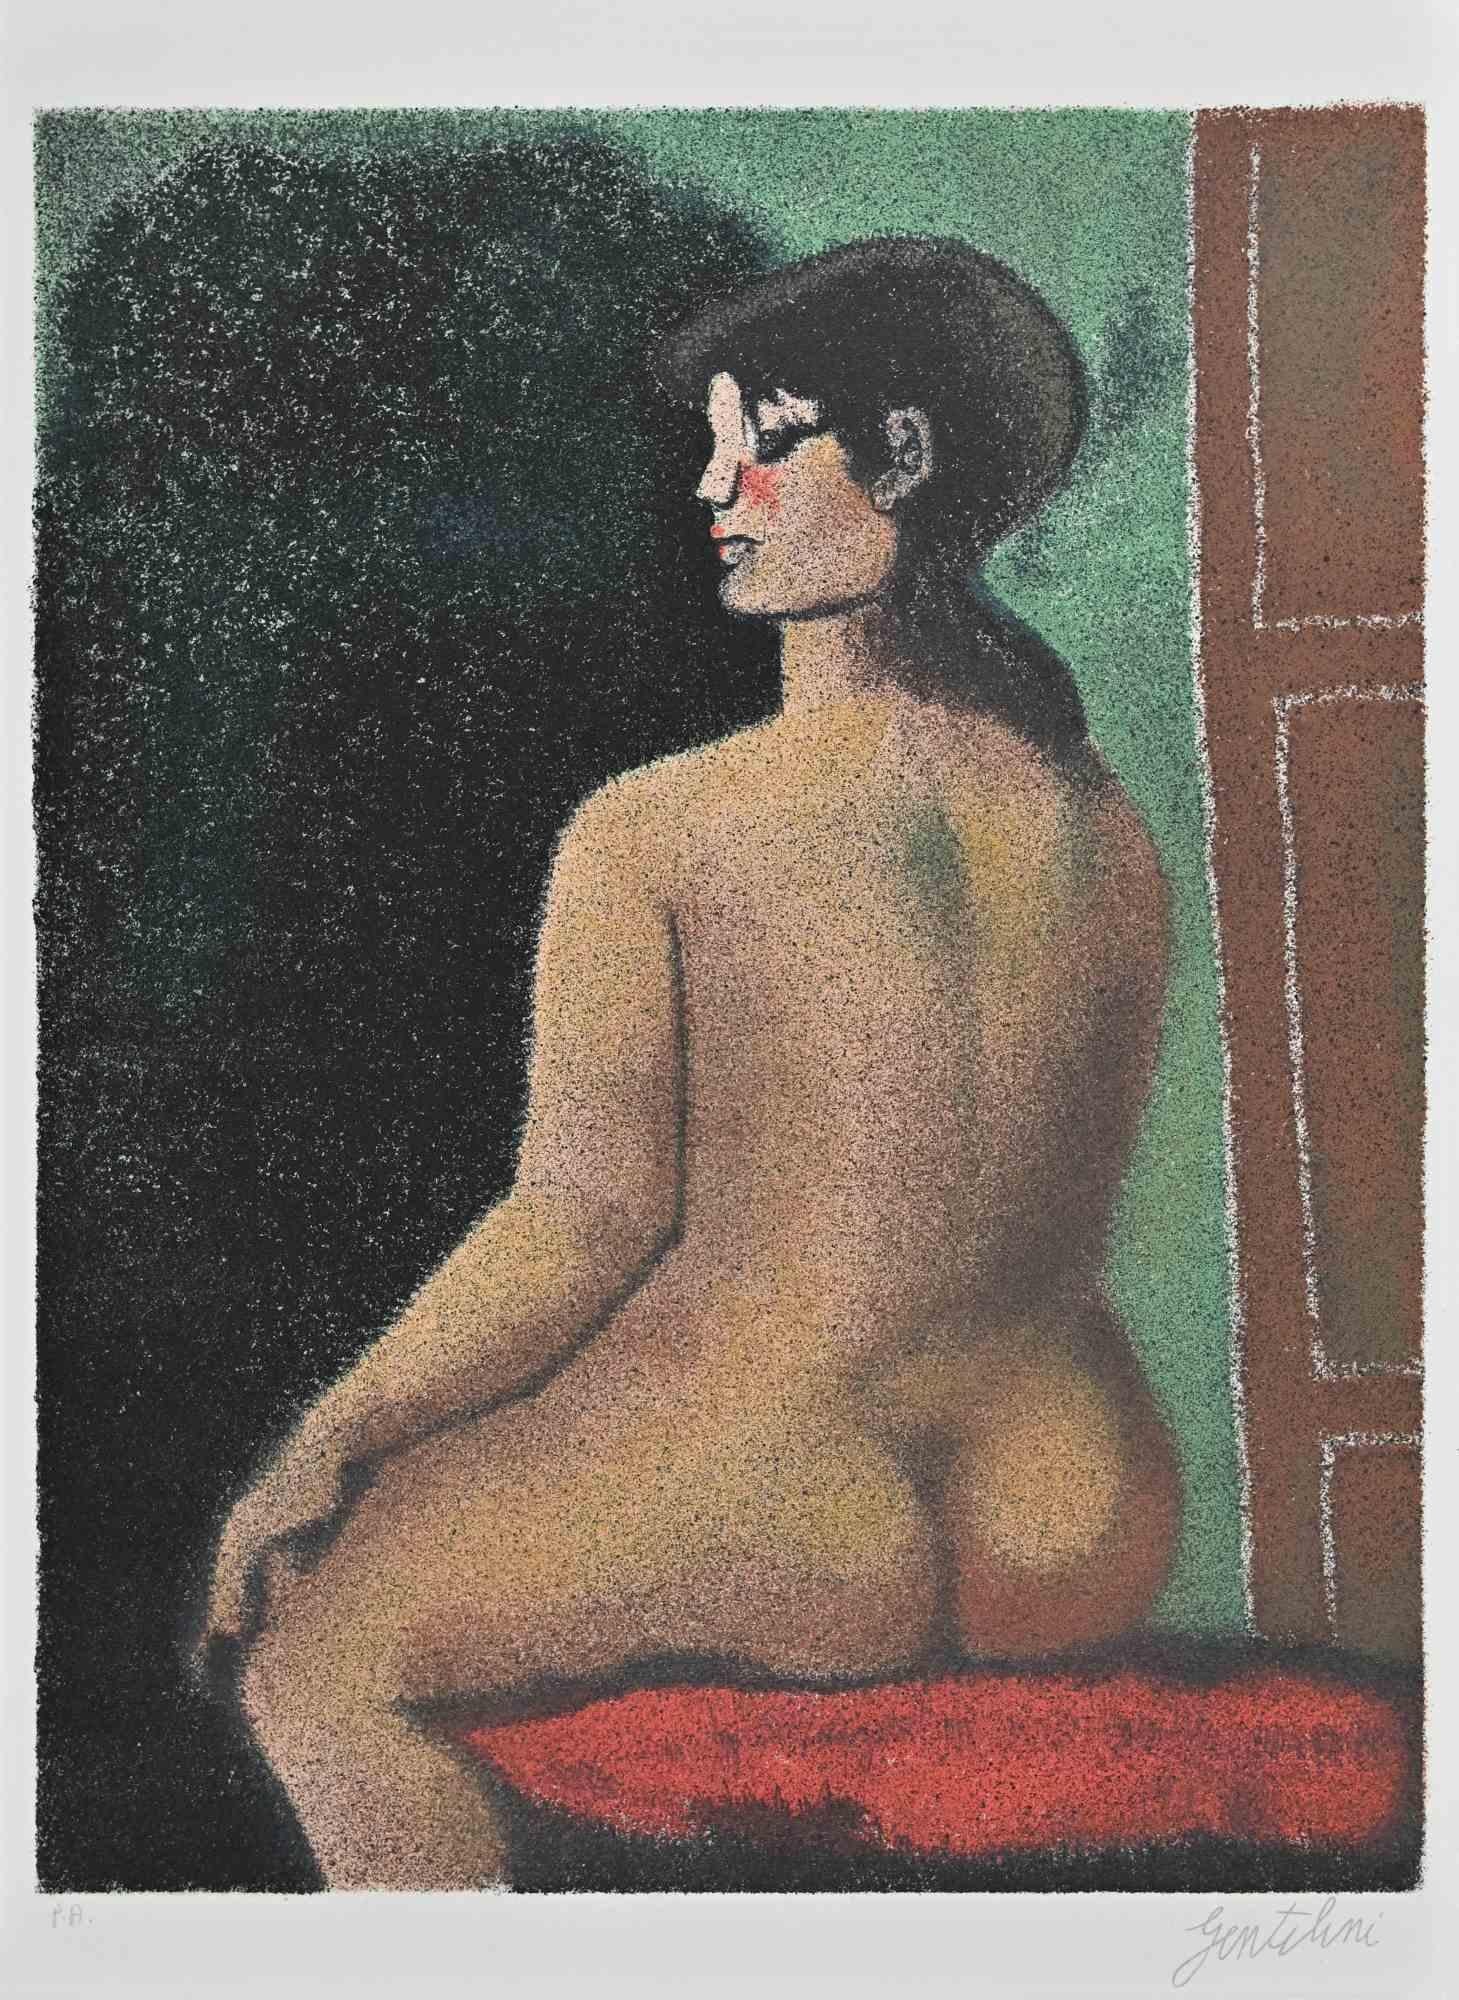 Nude from the Back is a Lithograph realized by Franco Gentilini (Italian Painter, 1909-1981), in the 1970s.

The state of preservation of the artwork is excellent.

Hand-signed.

Artist's proof.

Franco Gentilini ( Italian Painter, 1909-1981):